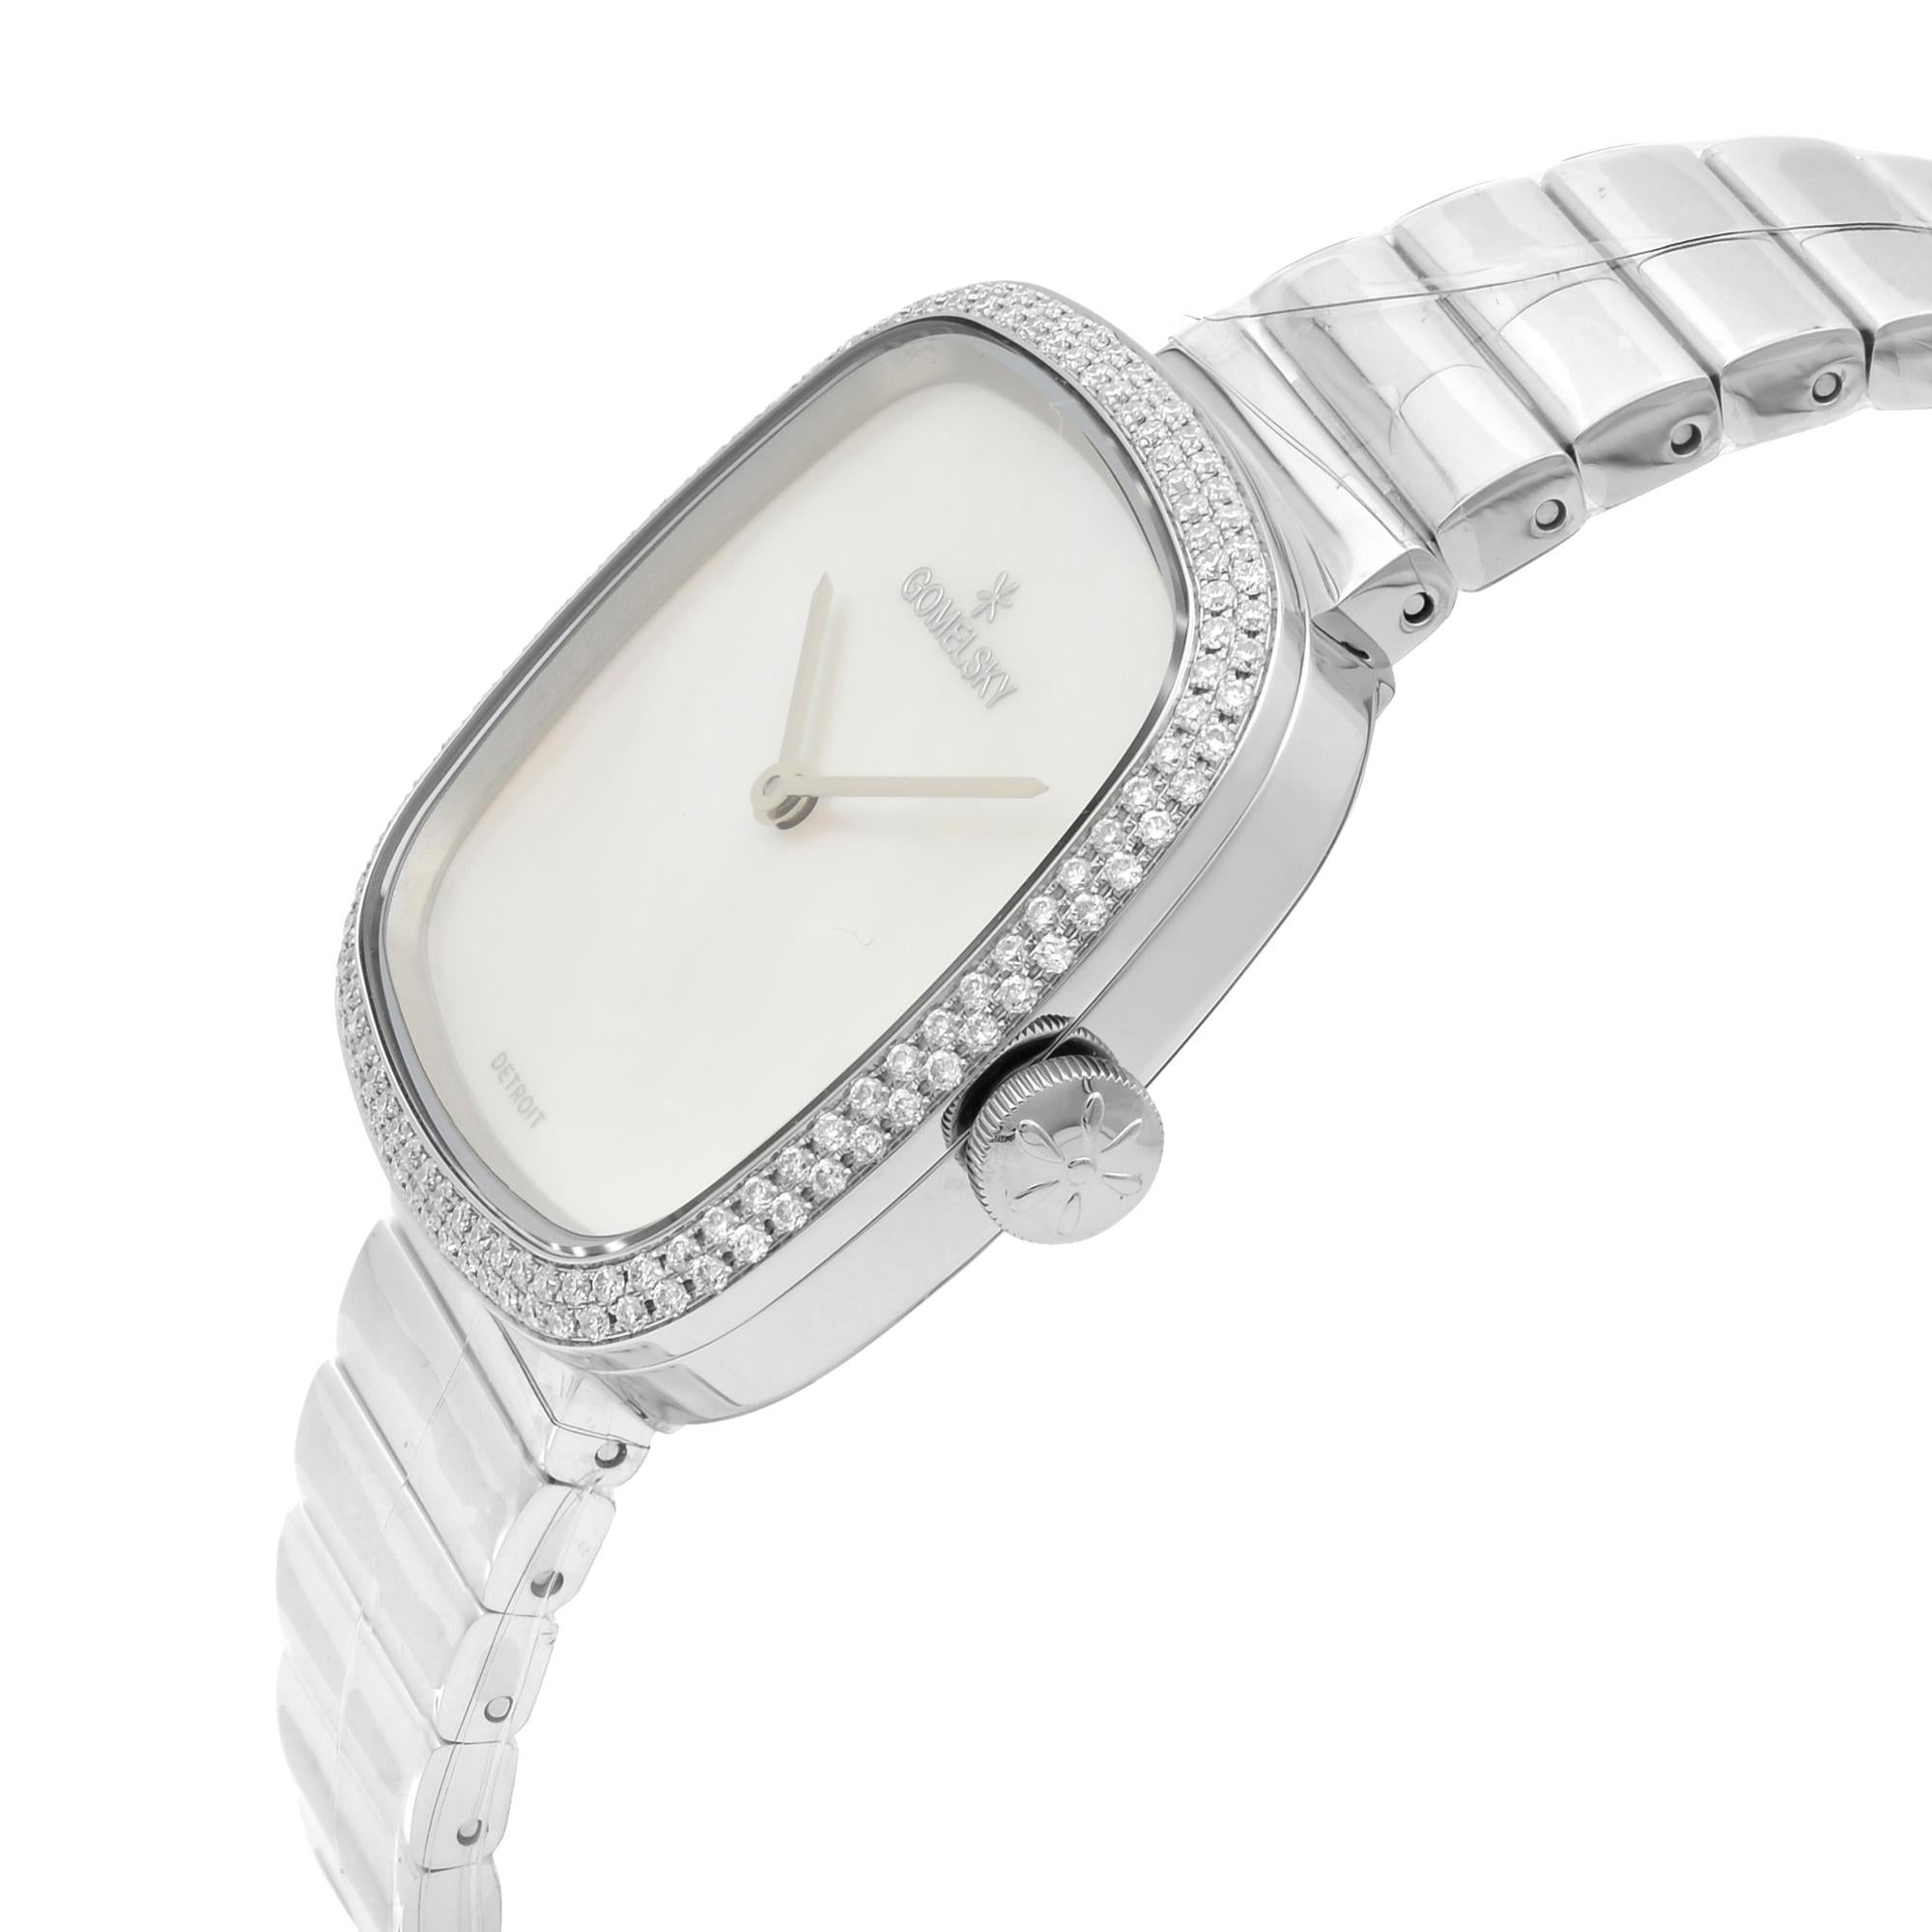 Modern Gomelsky Eppie Sneed Stainless Steel Diamond White Dial Ladies Watch G0120095028 For Sale